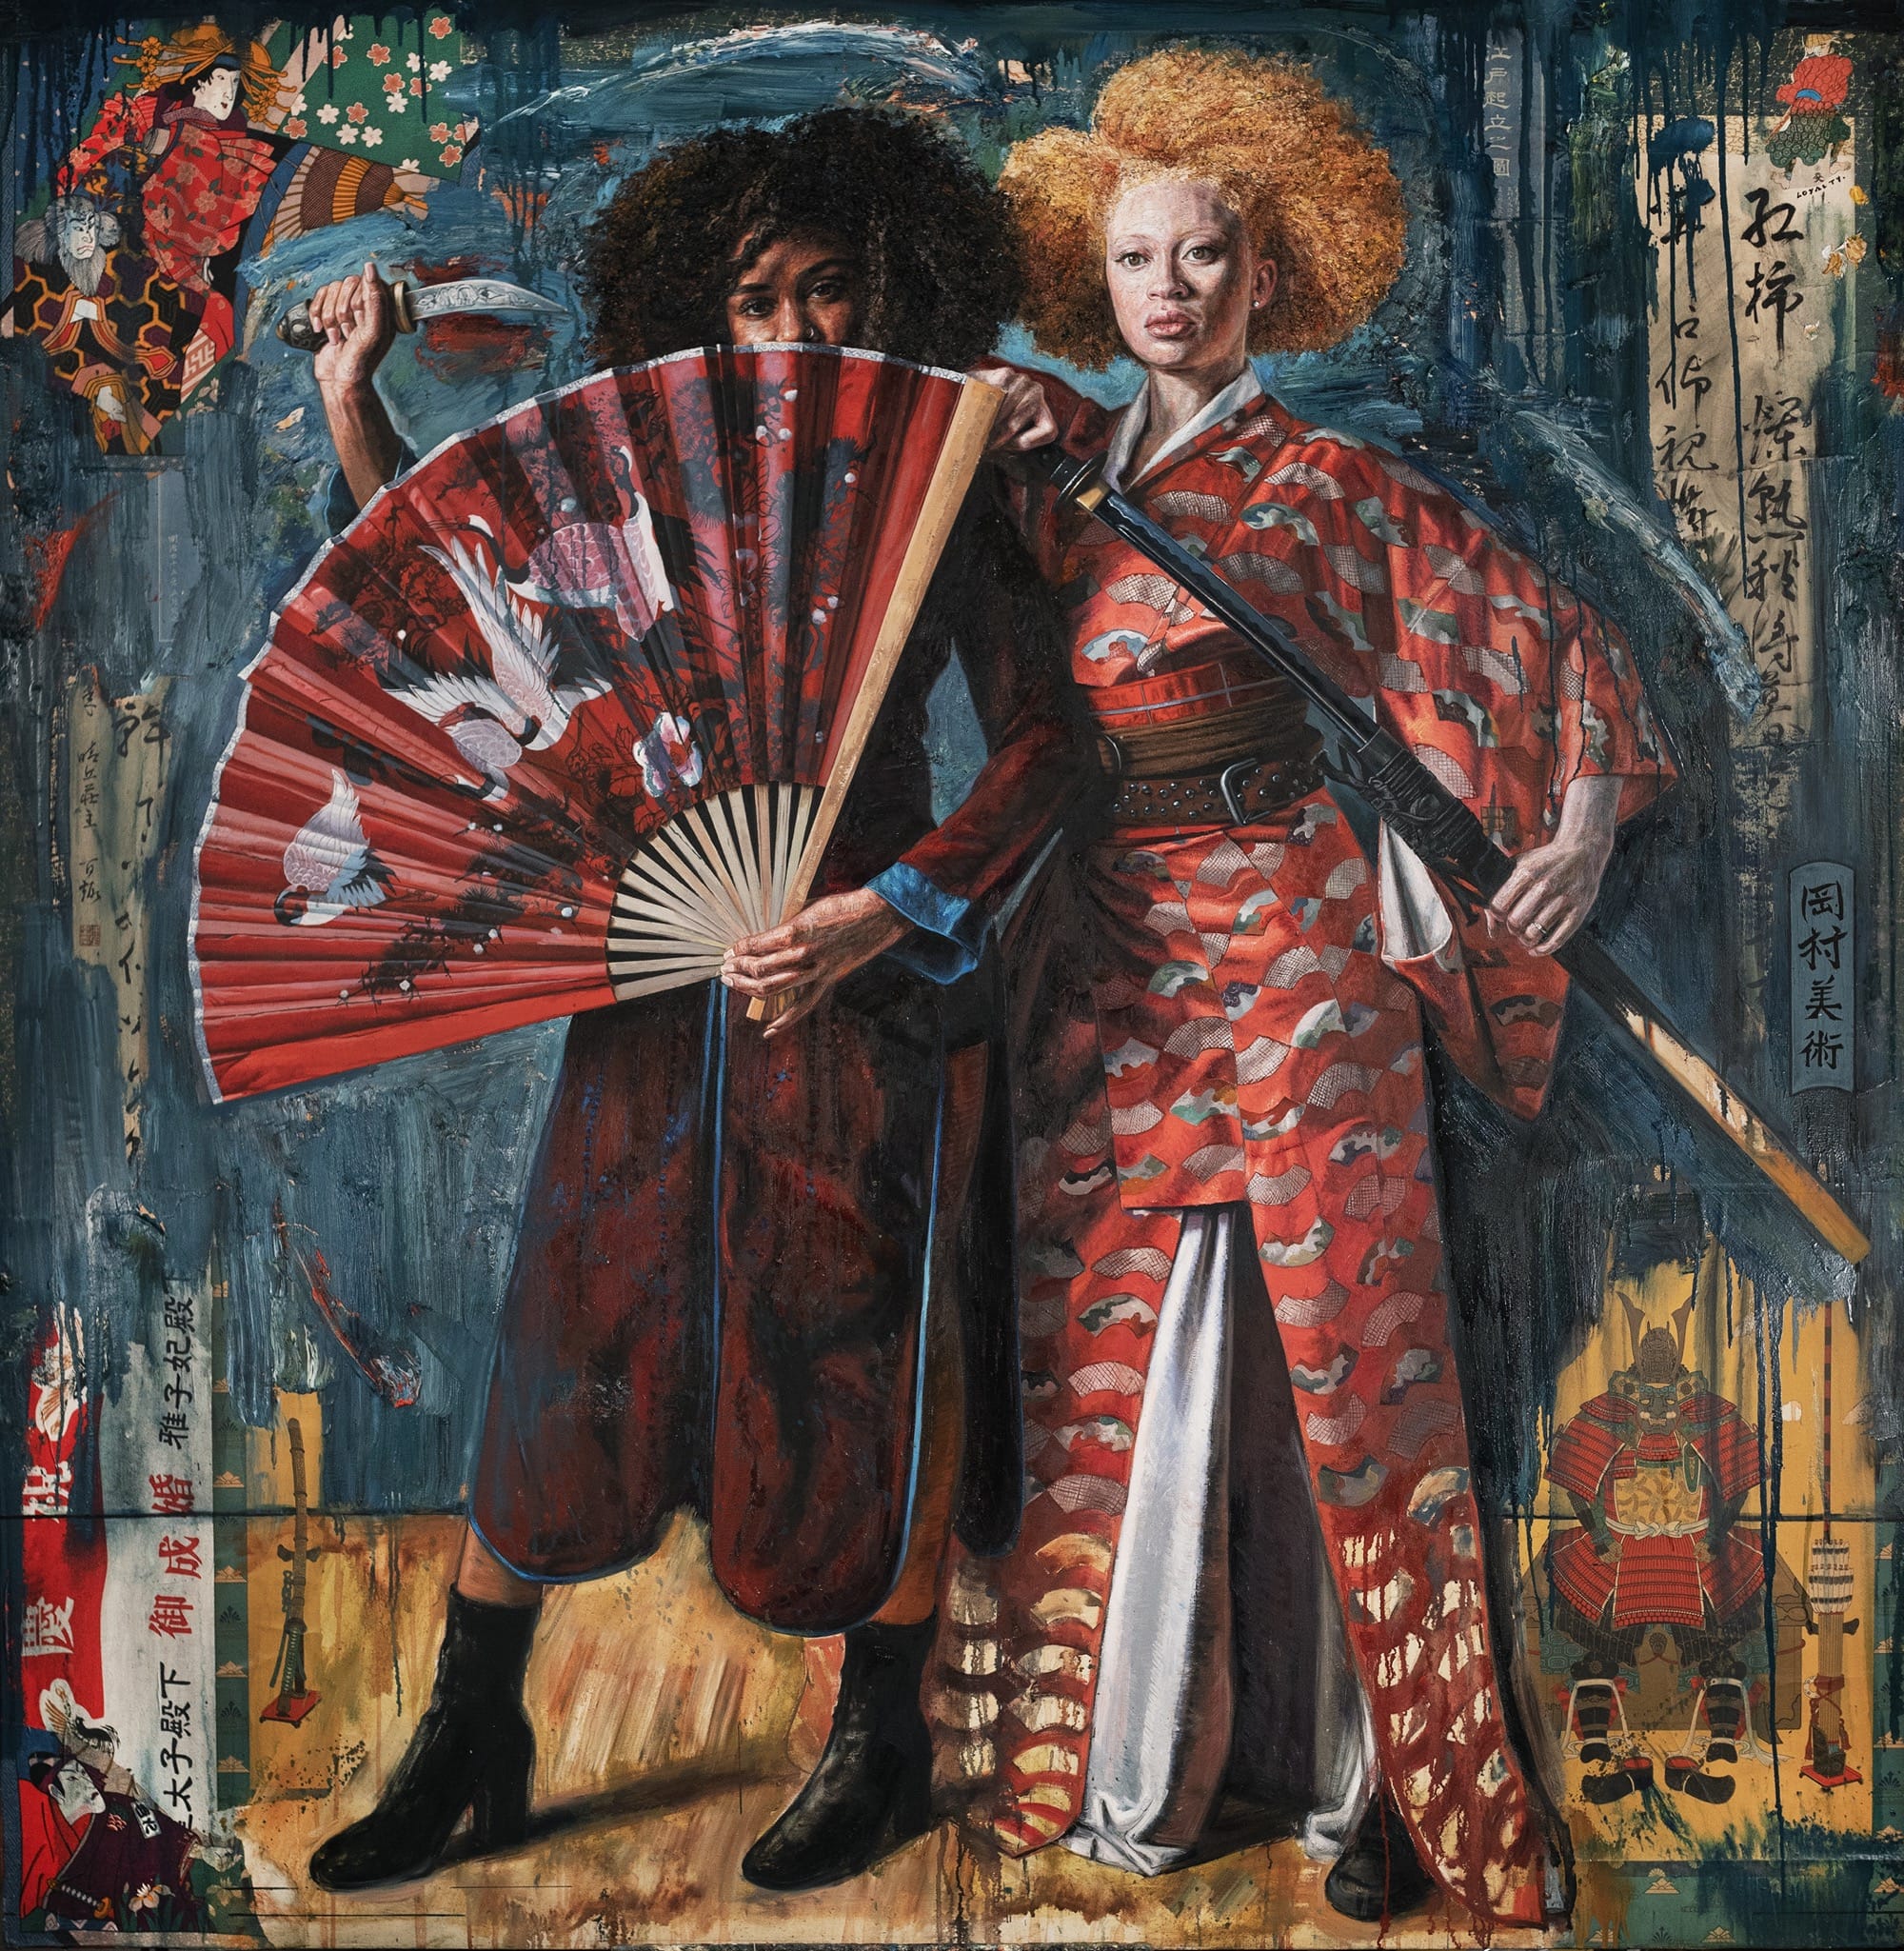 a painting of two Black women wearing Japanese kimonos and wielding swords and a fan